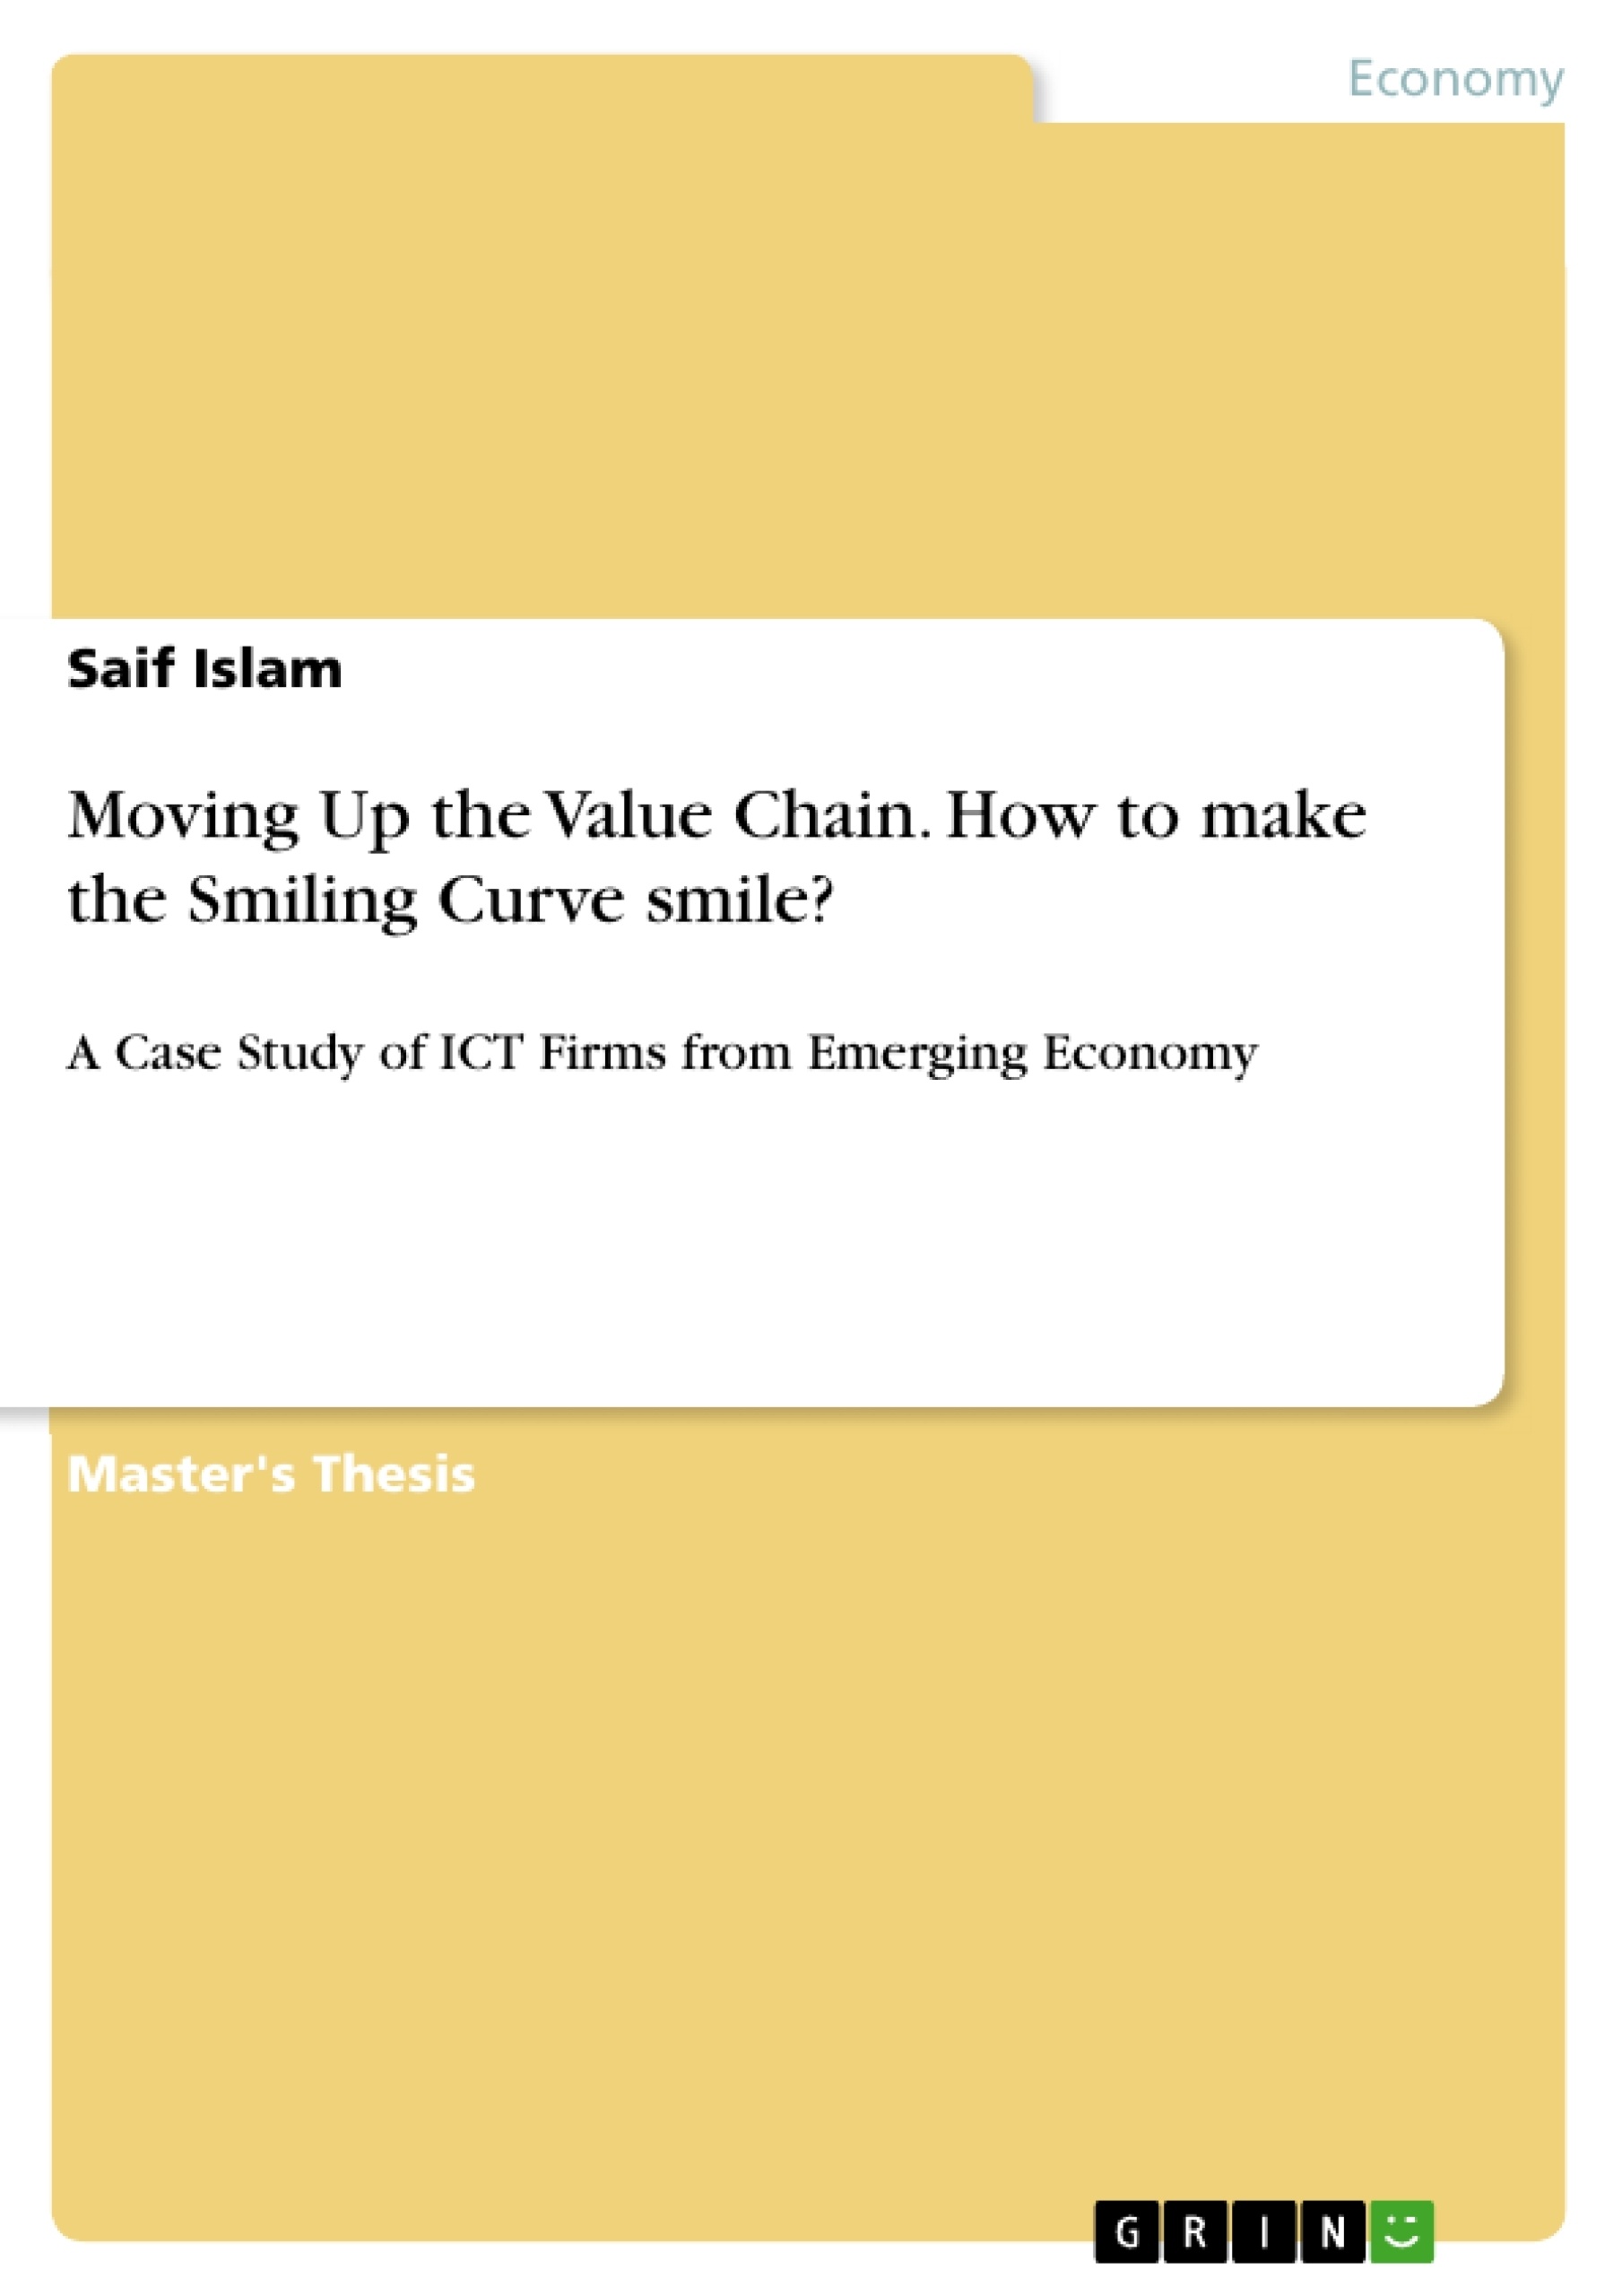 Título: Moving Up the Value Chain. How to make the Smiling Curve smile?